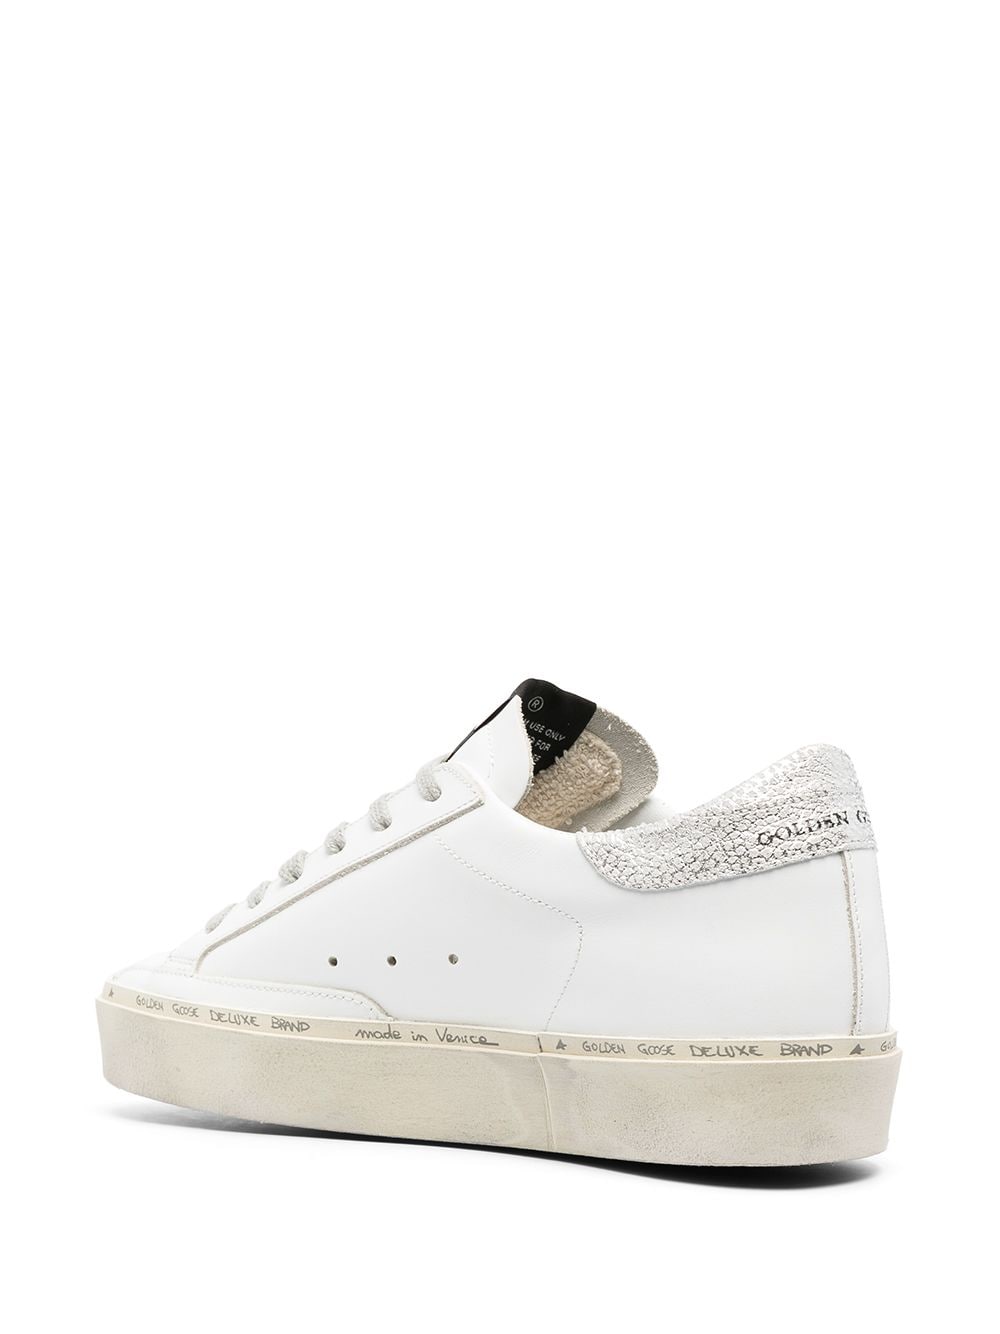 GOLDEN GOOSE White Leather High Top Sneakers for Women